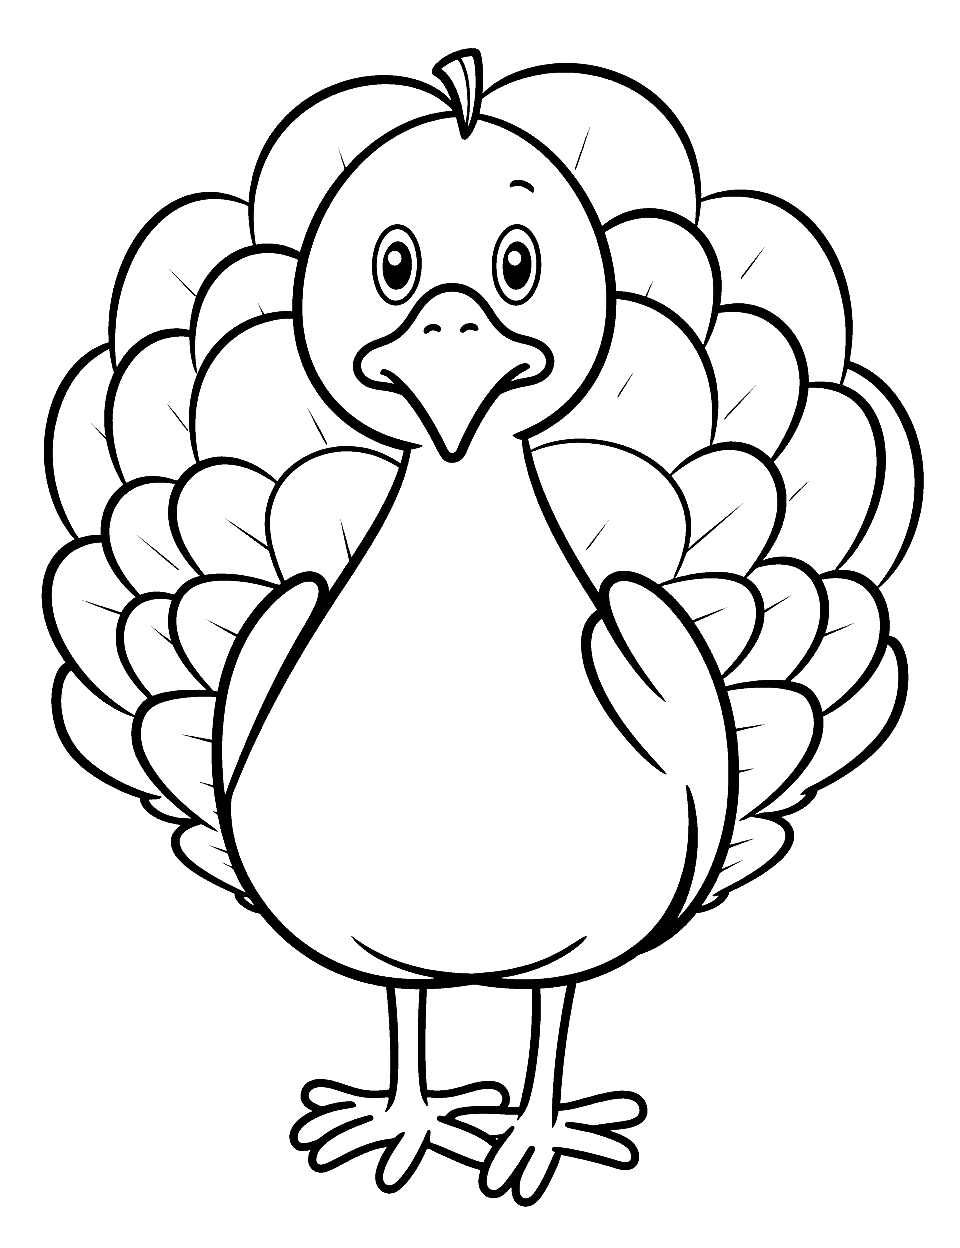 Clipart Turkey Coloring Page - A cartoon-style turkey in clipart form that kids can enjoy coloring.